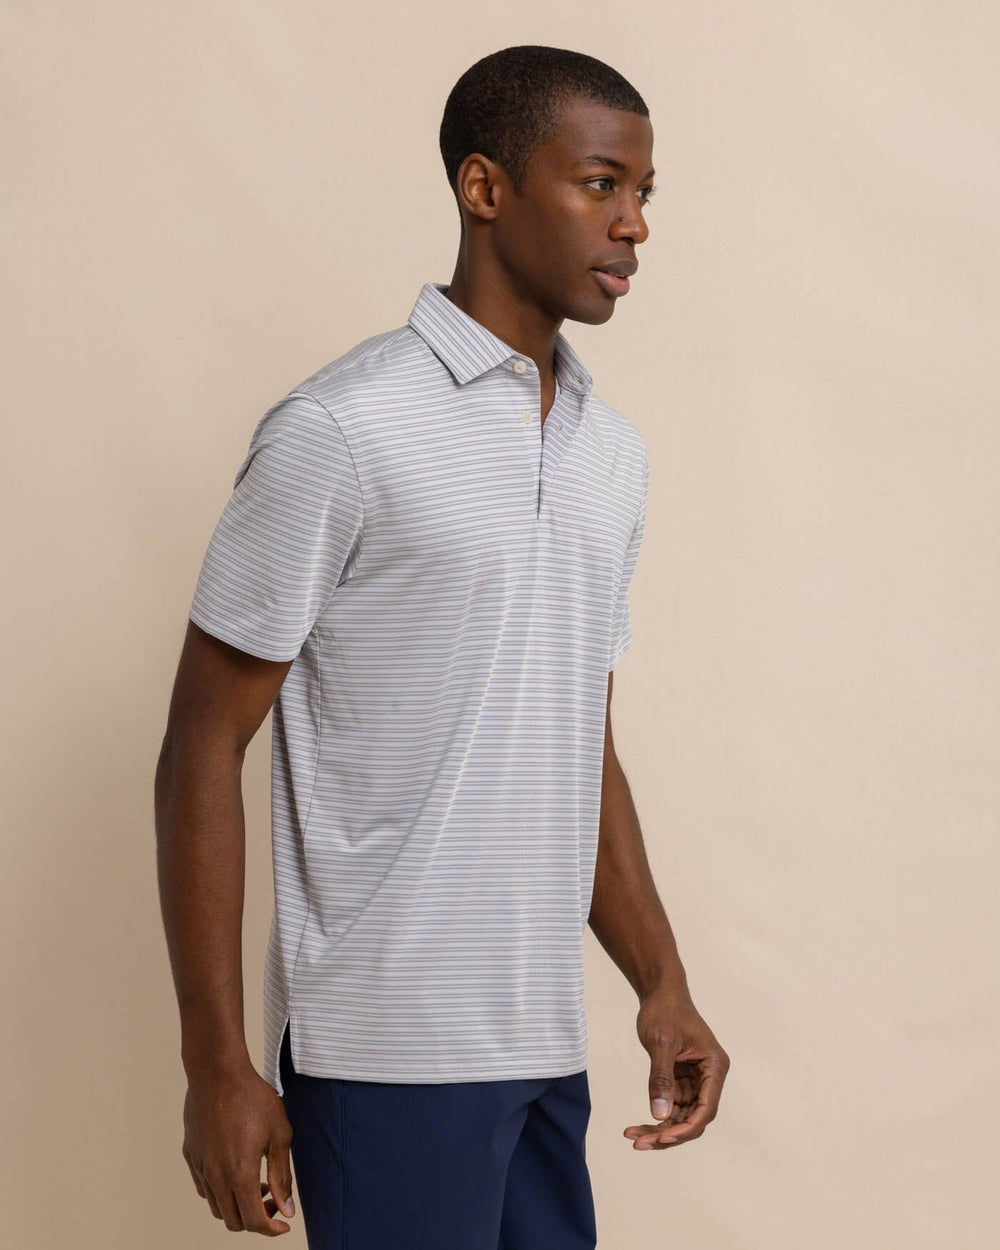 The front view of the Southern Tide Driver Baywoods Stripe Polo by Southern Tide - Platinum Grey